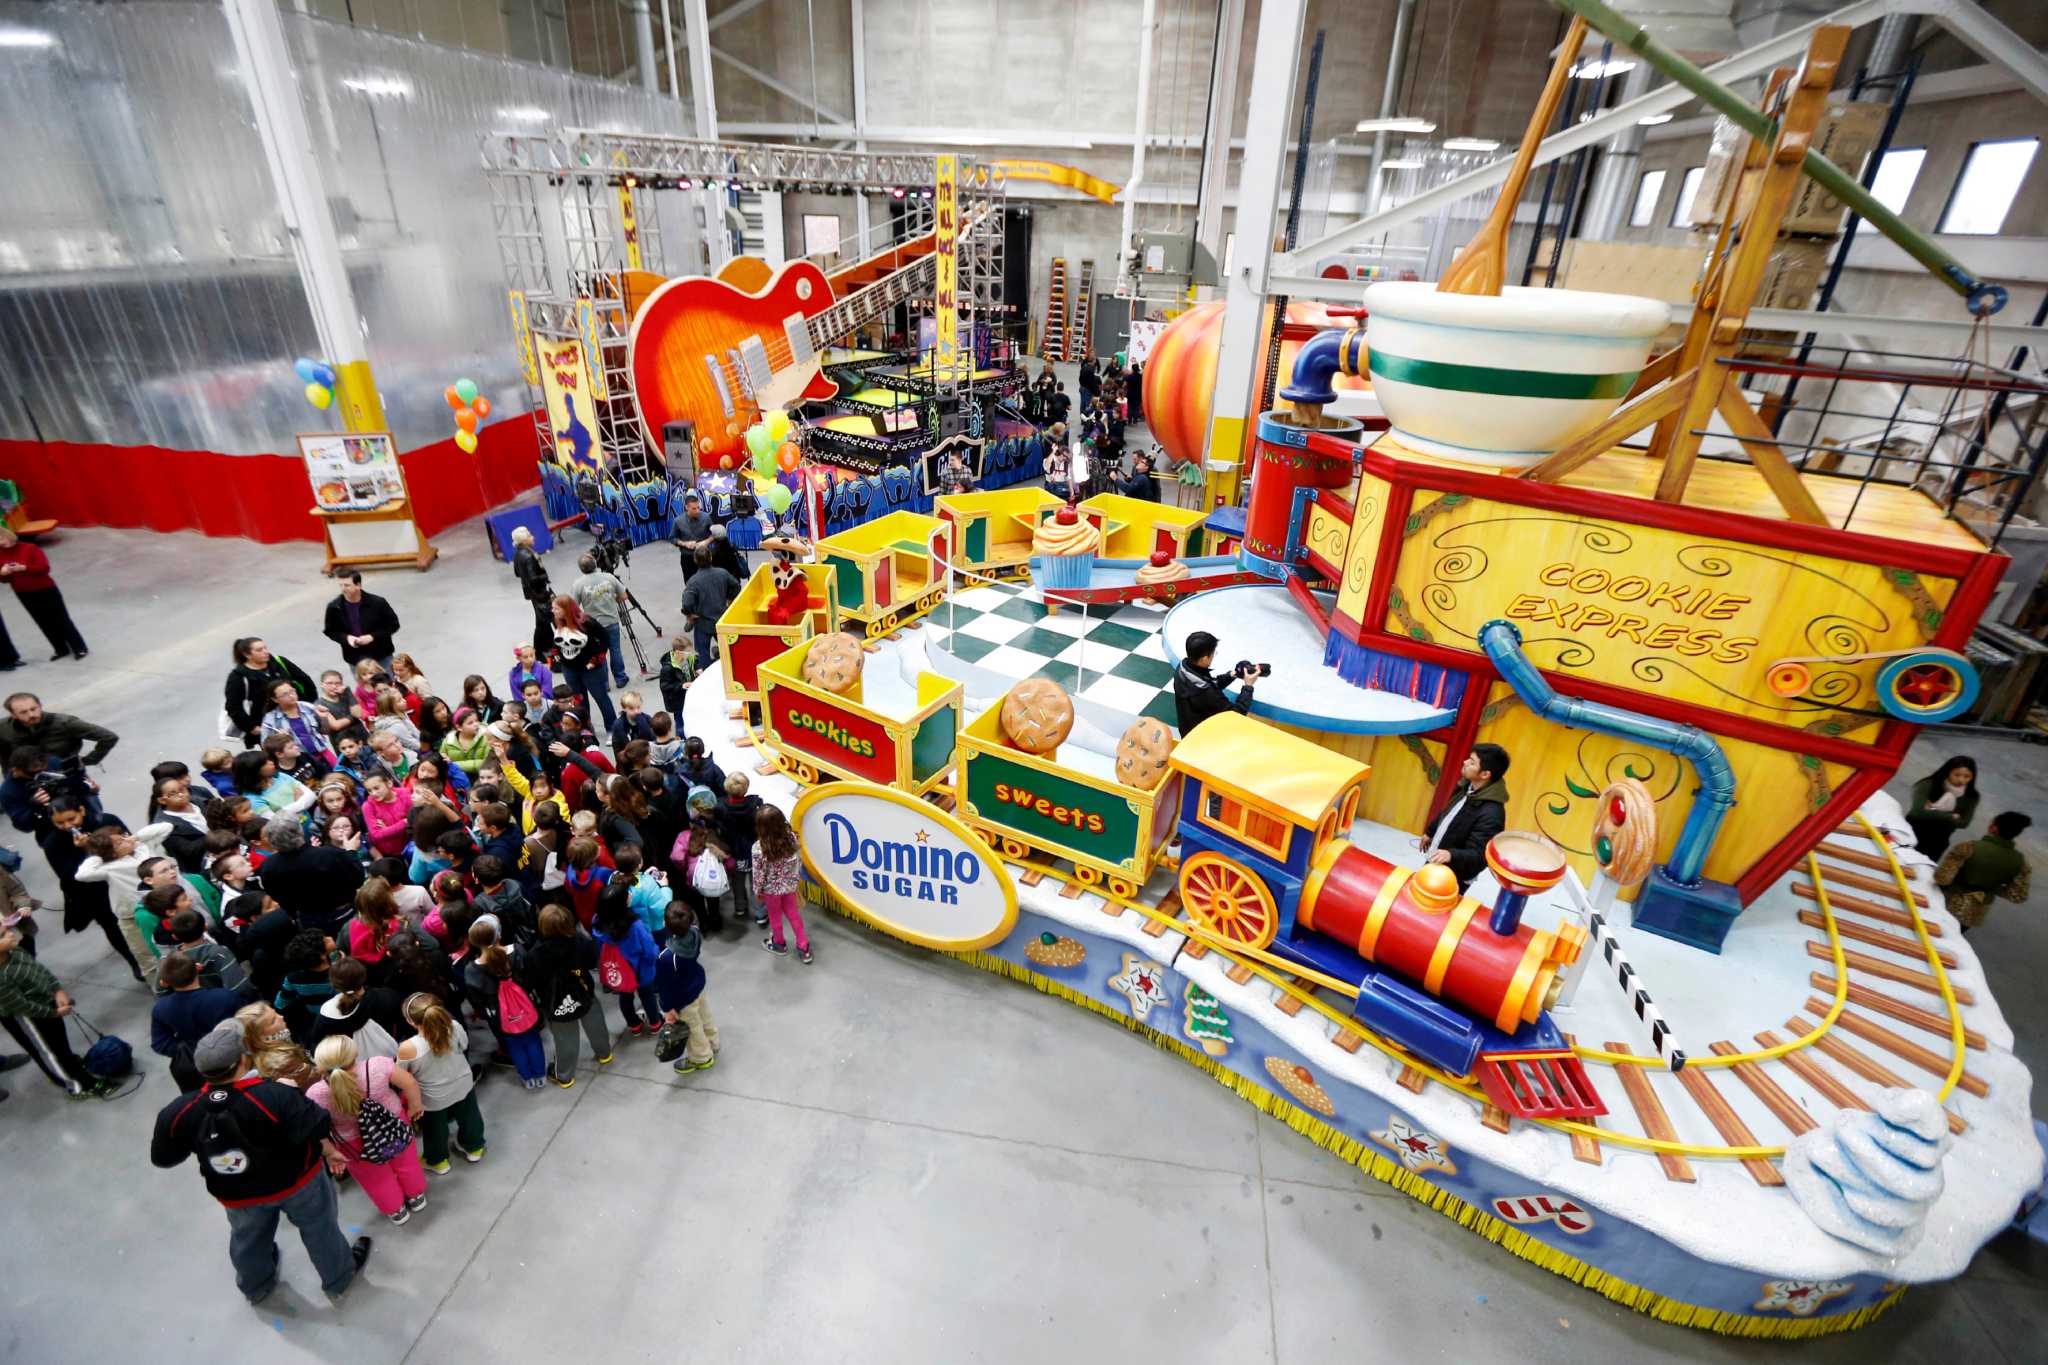 New floats for Macy's parade